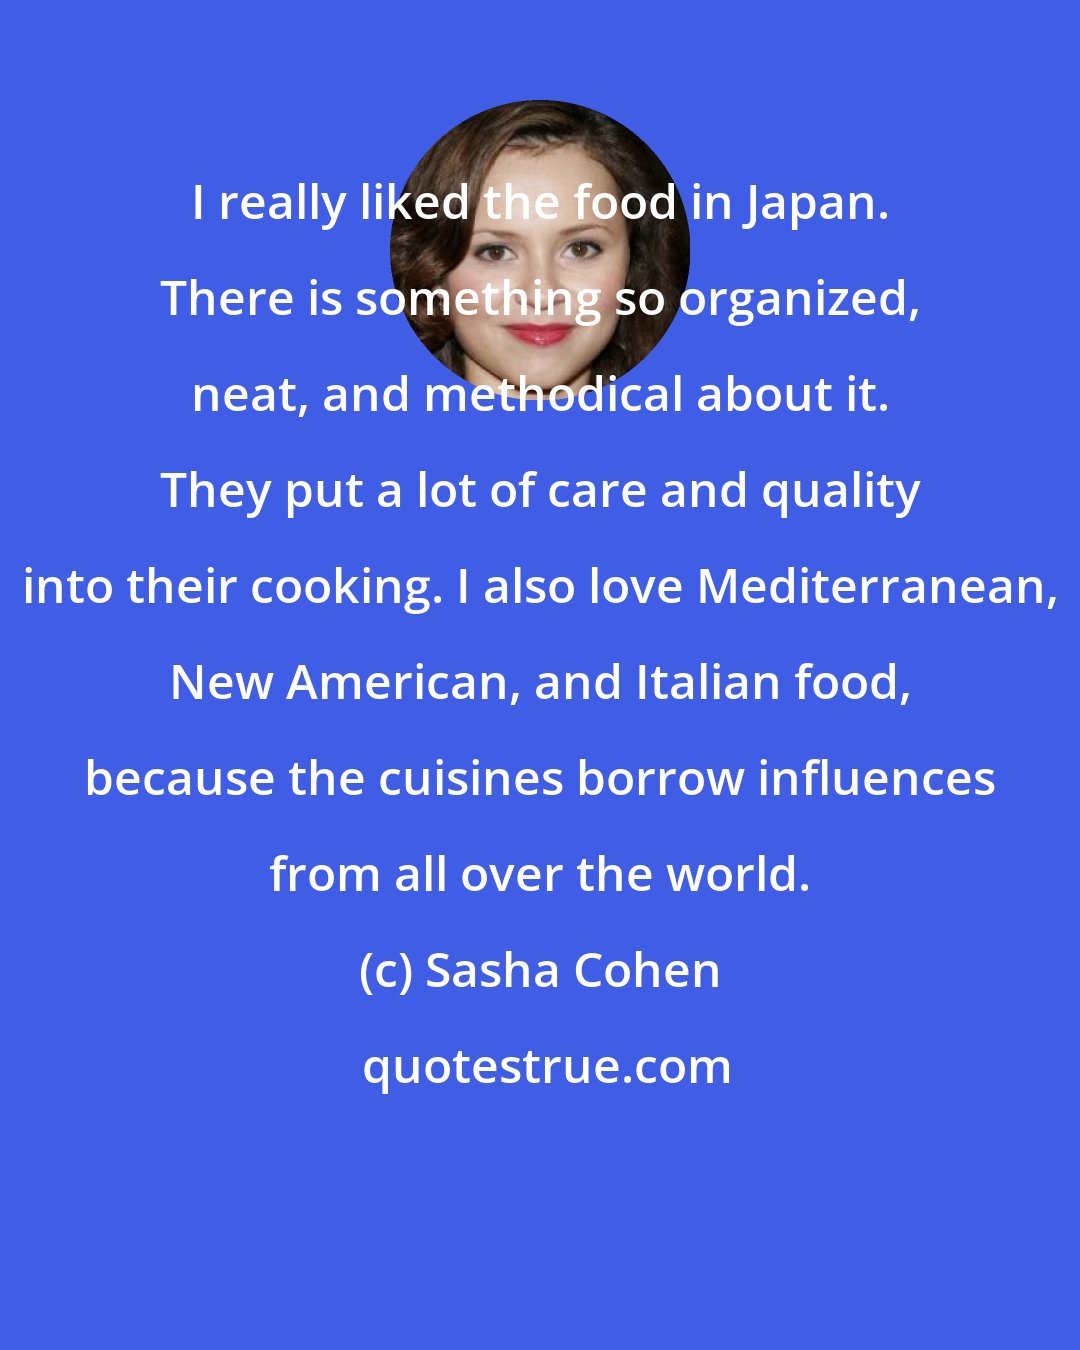 Sasha Cohen: I really liked the food in Japan. There is something so organized, neat, and methodical about it. They put a lot of care and quality into their cooking. I also love Mediterranean, New American, and Italian food, because the cuisines borrow influences from all over the world.